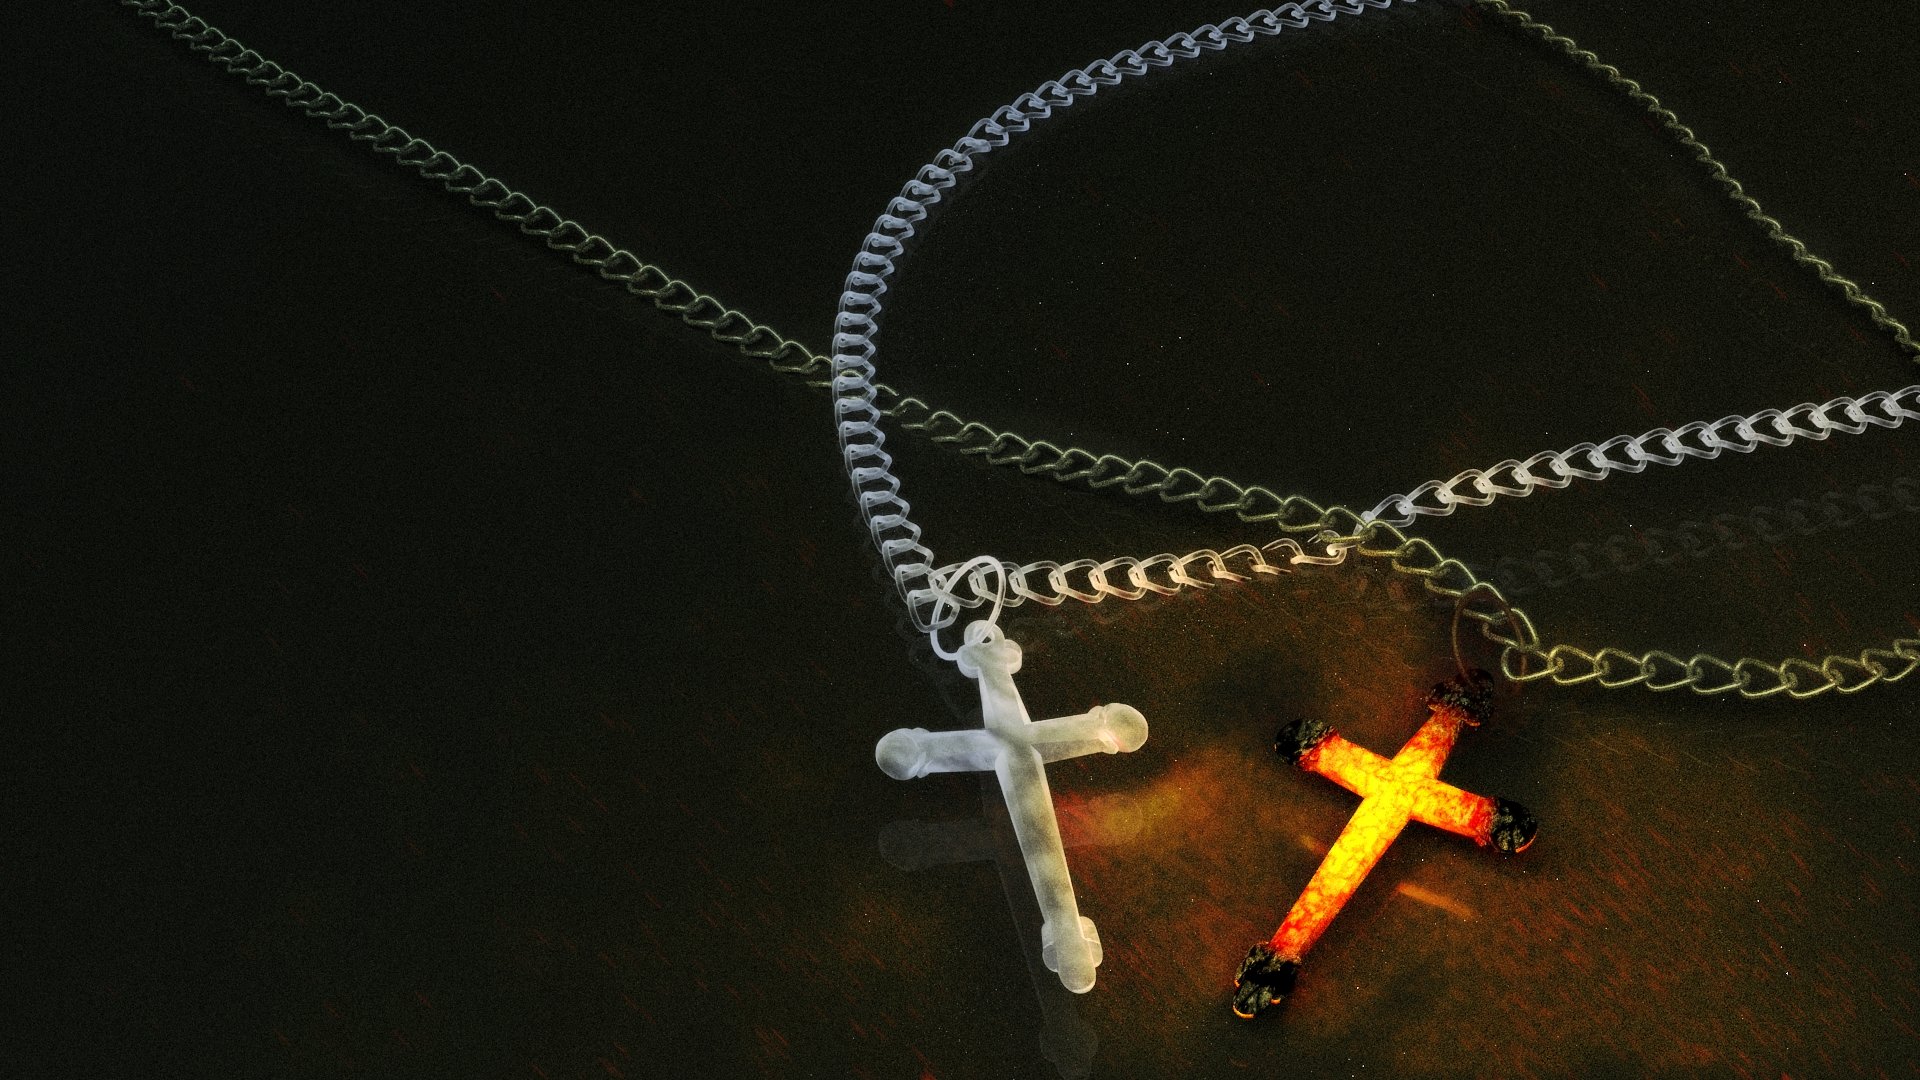 Free Cross High Quality Background Id - Necklace Cross Dark Gothic - HD Wallpaper 